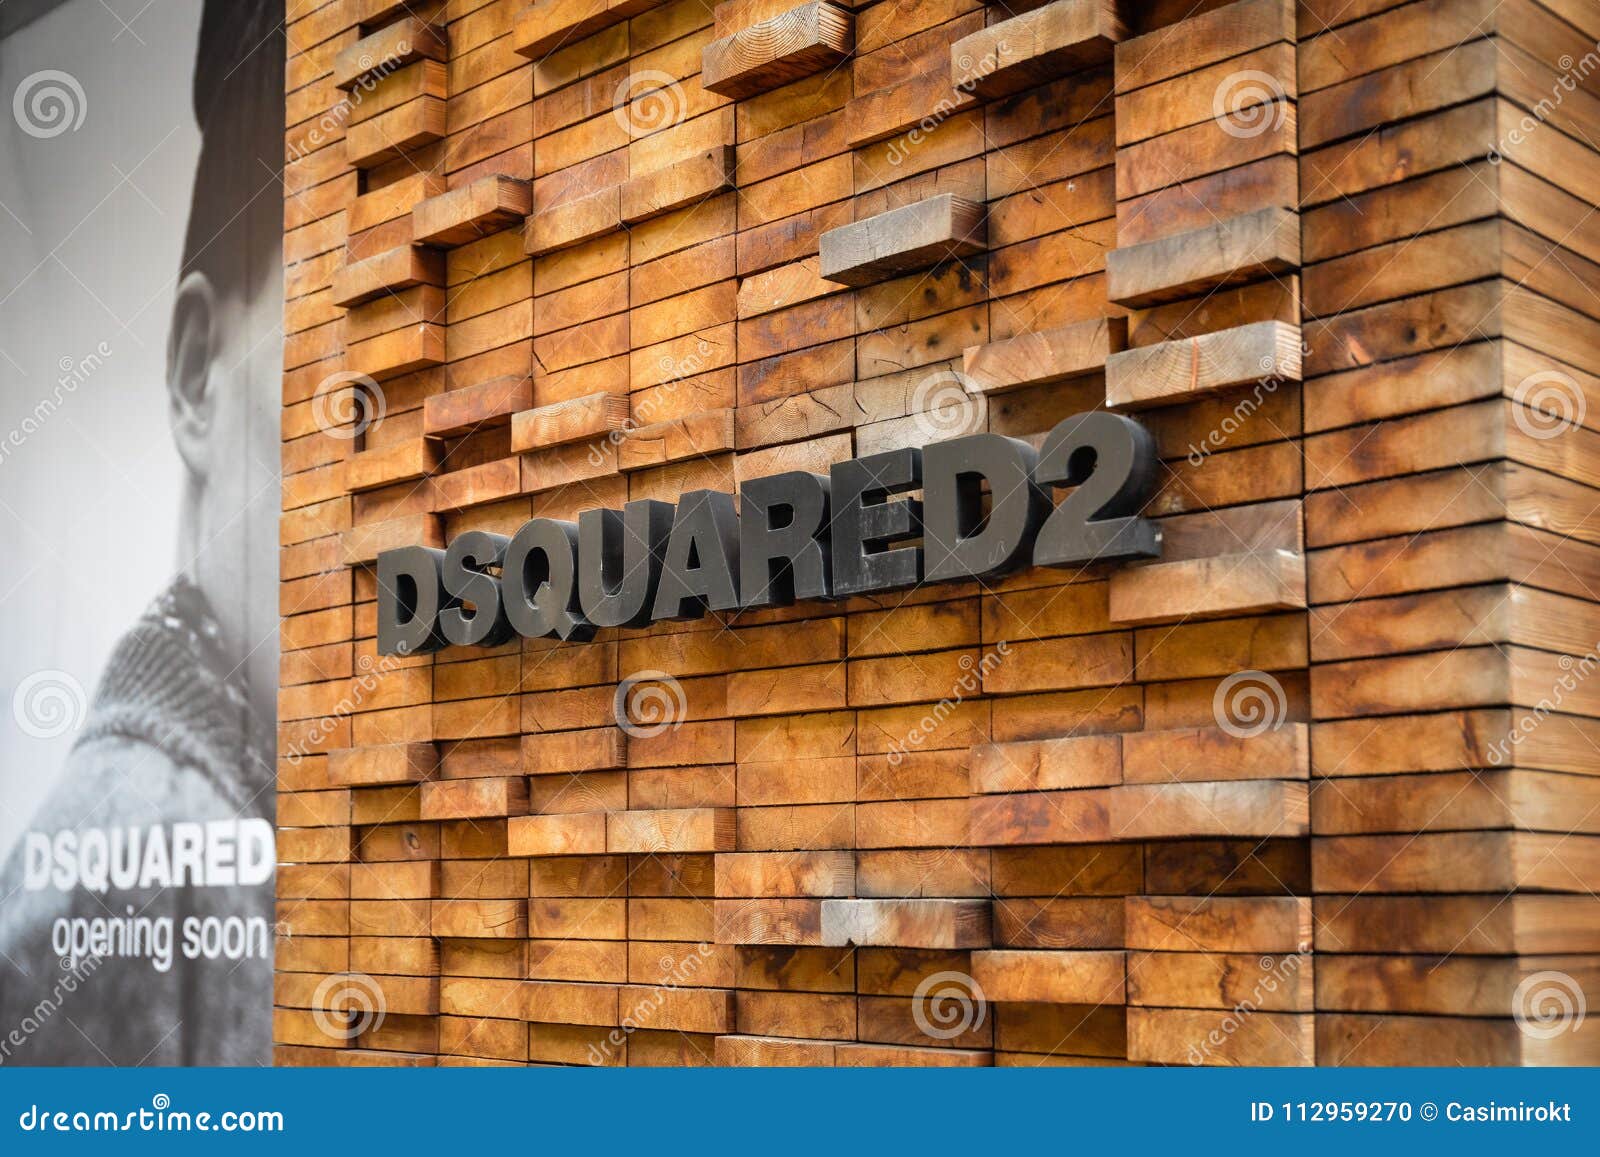 dsquared shop in milan